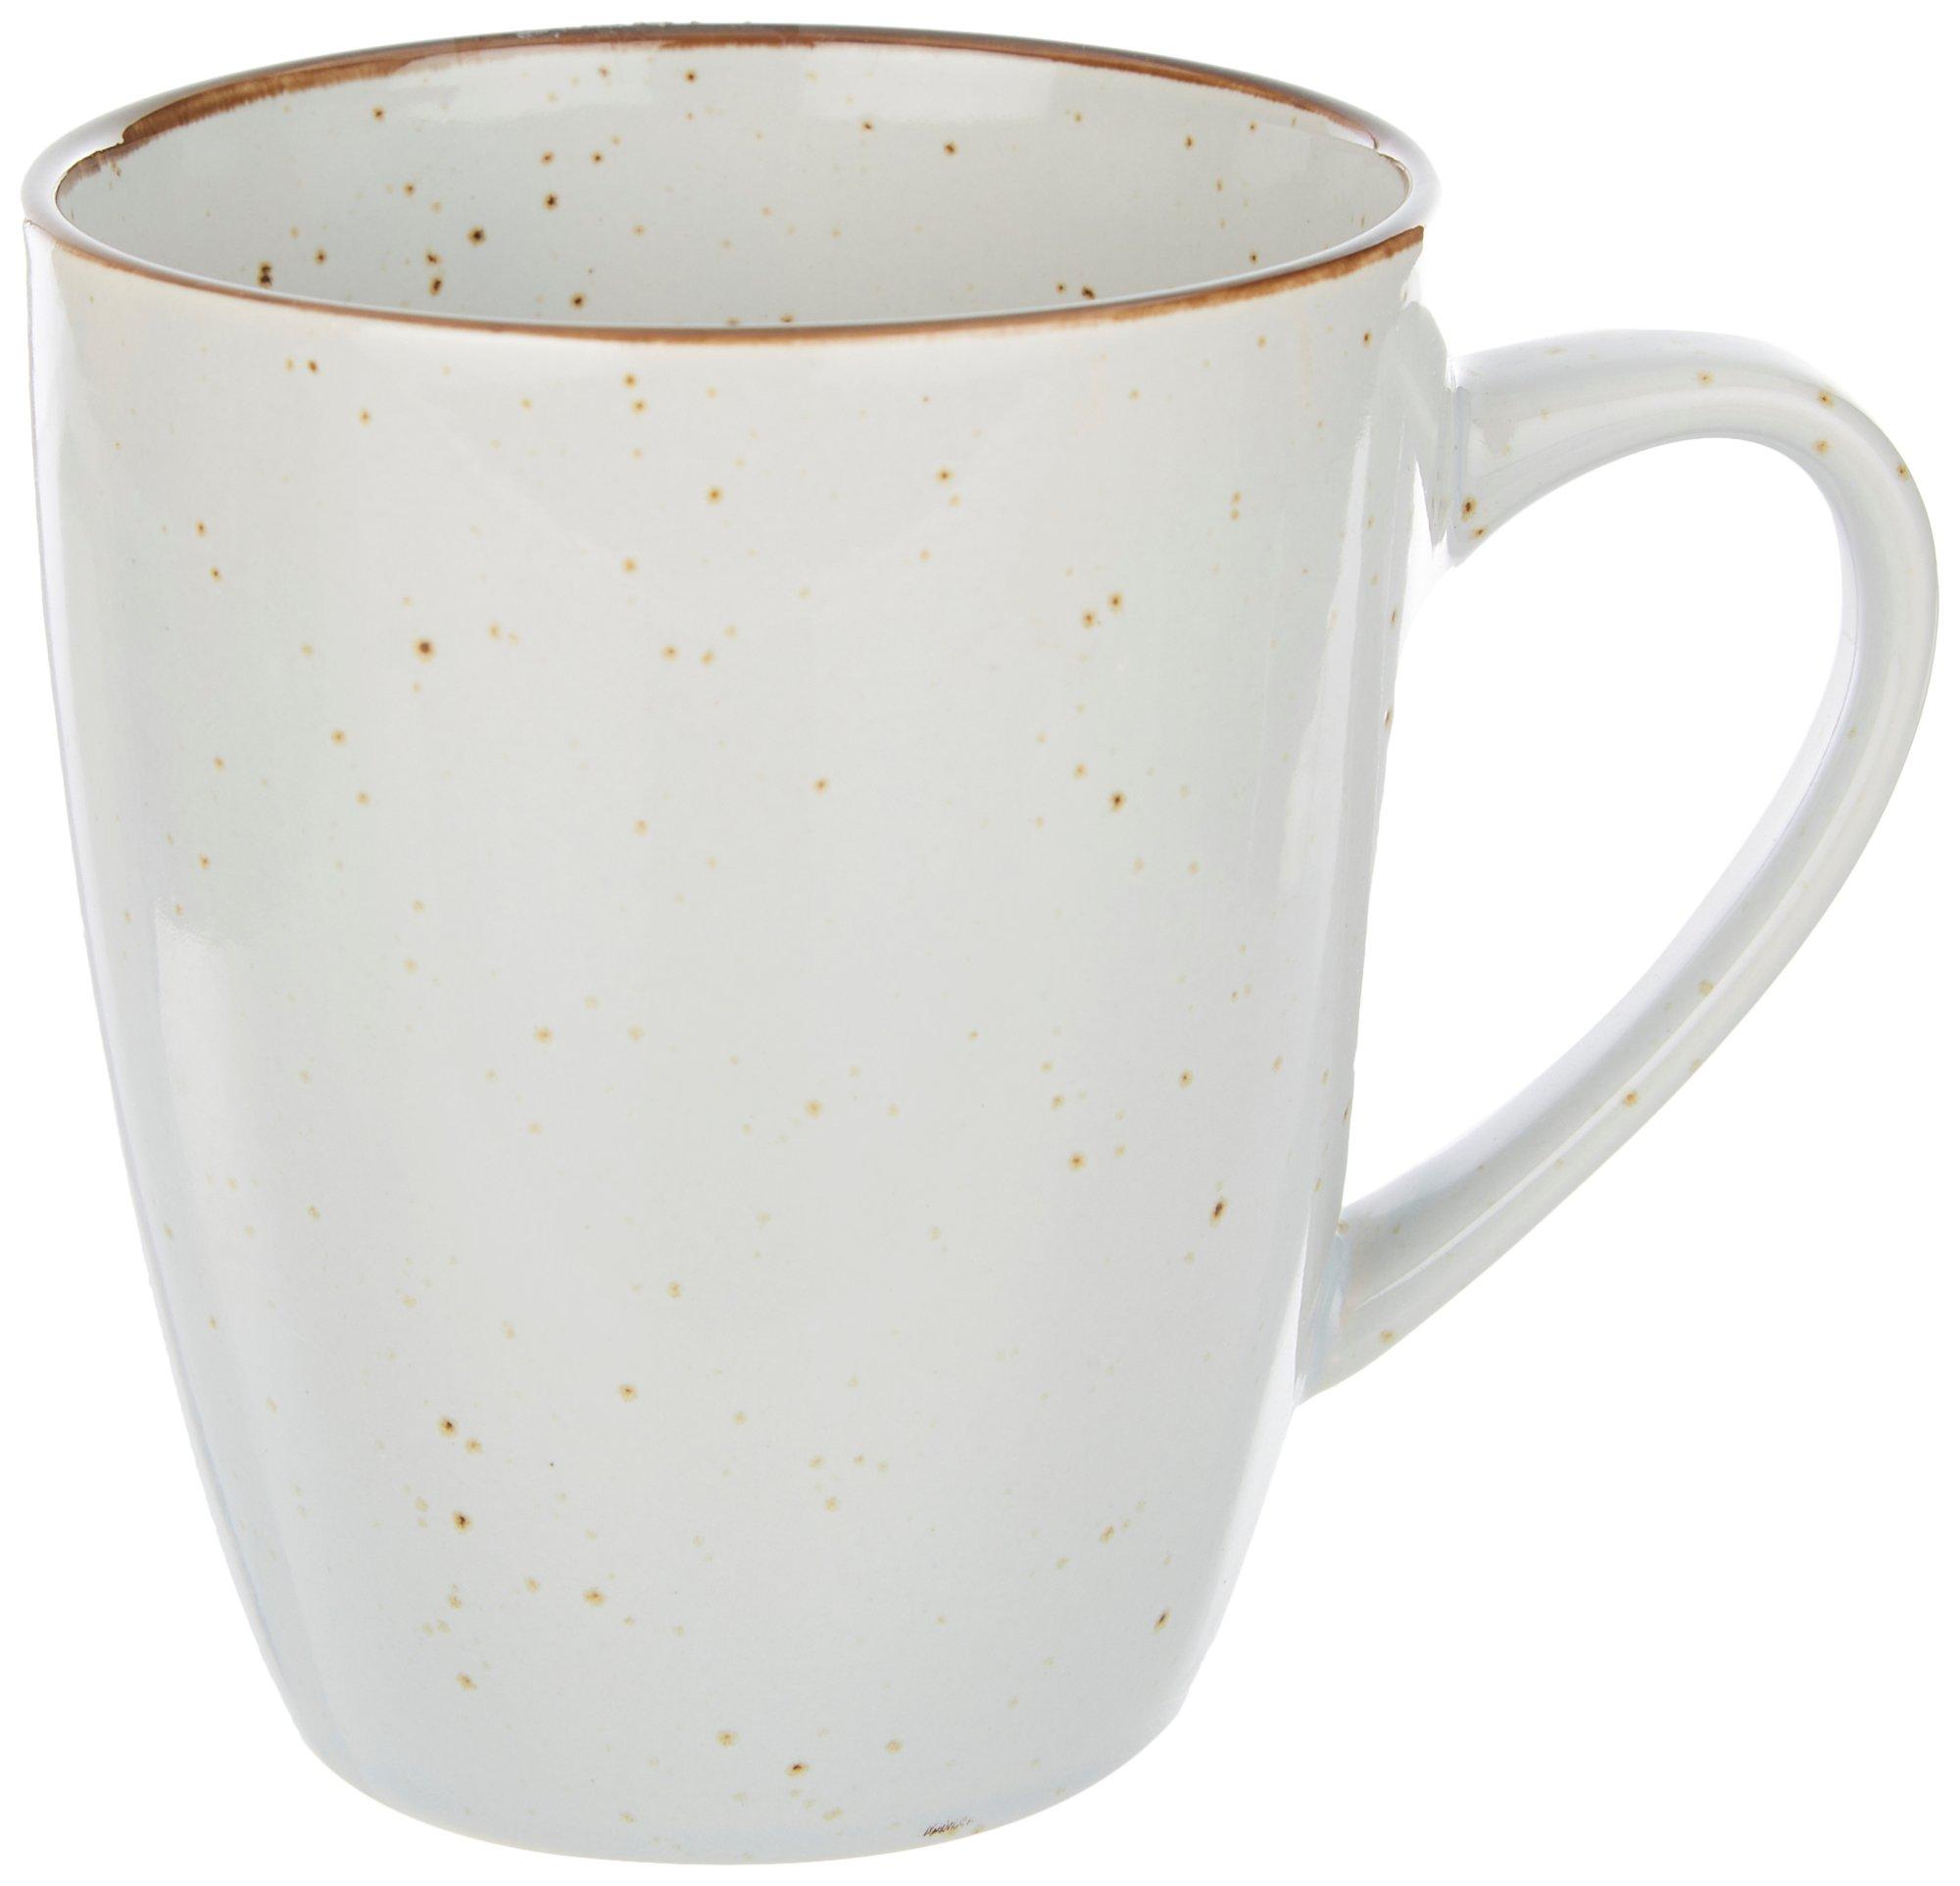 Northpoint Trading 13 Oz. Speckled Spa Mug